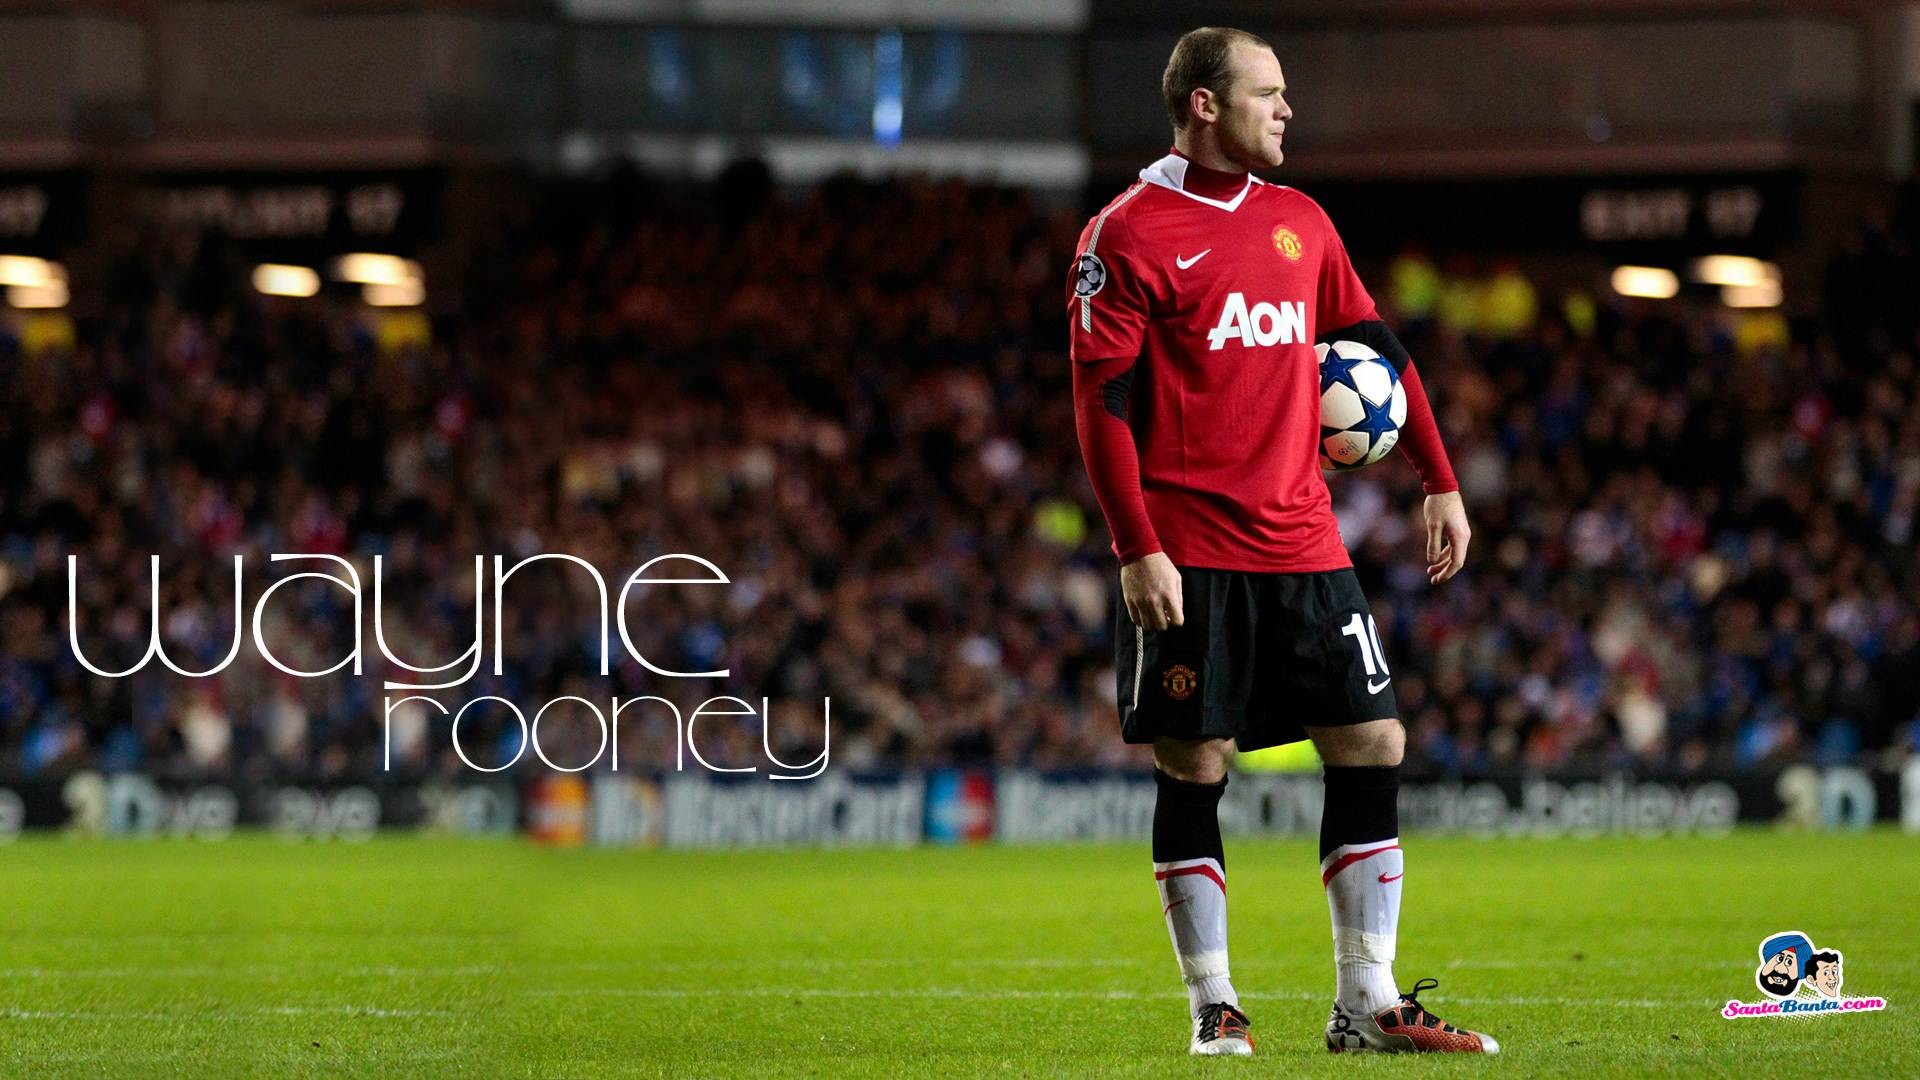 1920x1080 FIFA World Cup 2014 Wayne Rooney Wallpapers, Pictures, Images, Photos